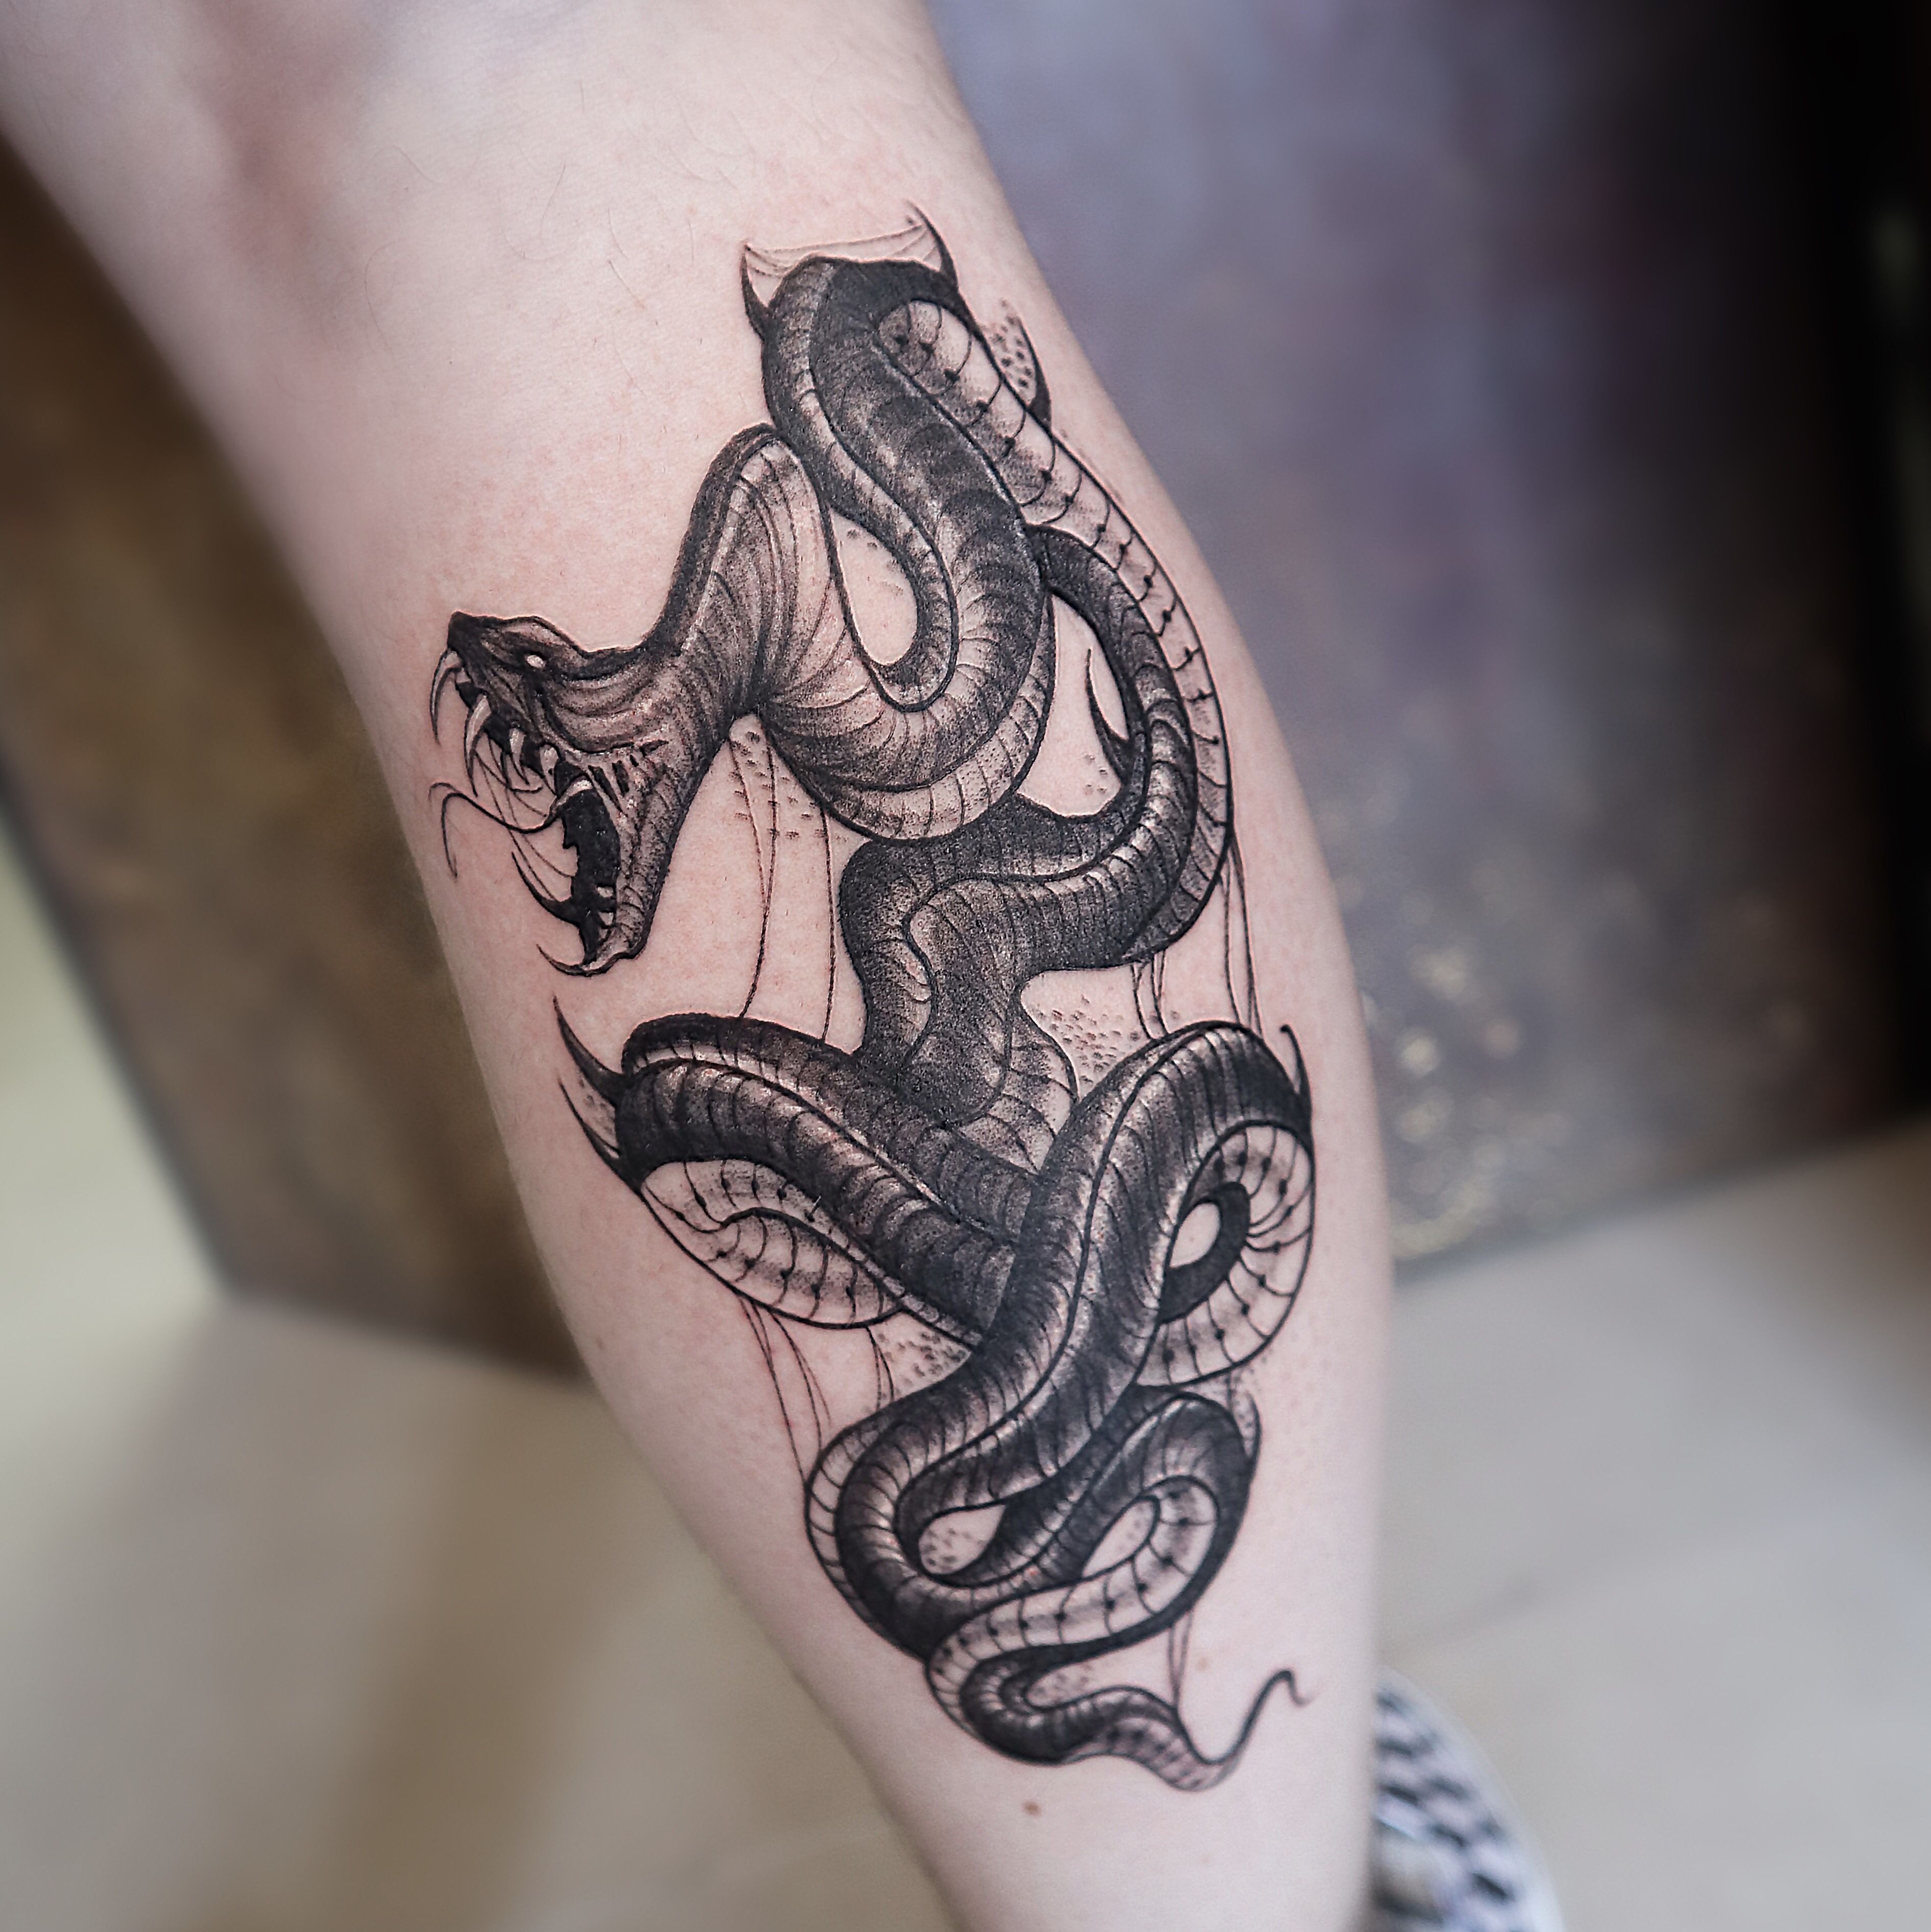 Spfx Tattoo - Louis Vuitton snake pretty cool also moves with her bend of  the knee #louisvuitton #snaketattoo #legtattoo #lineworktattoo  #blackandgreytattoo #solidink @thesolidink #tattoo #tattoos #tattooed  #inkjecta @inkjecta #tattooartist #tattooart